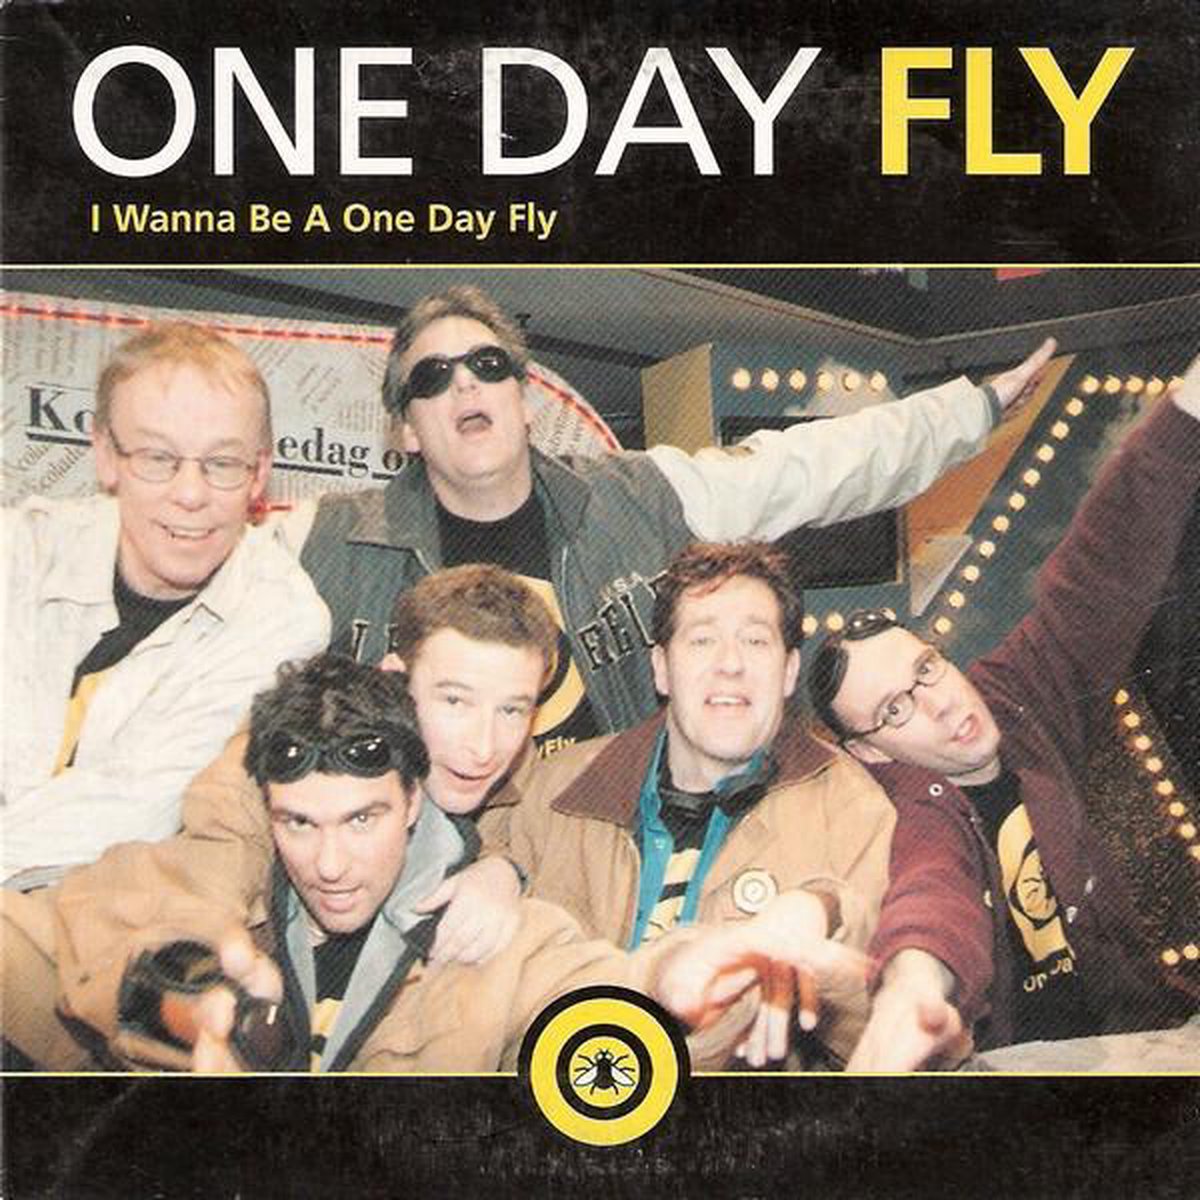 I Wanna Be A One Day Fly - One Day Fly